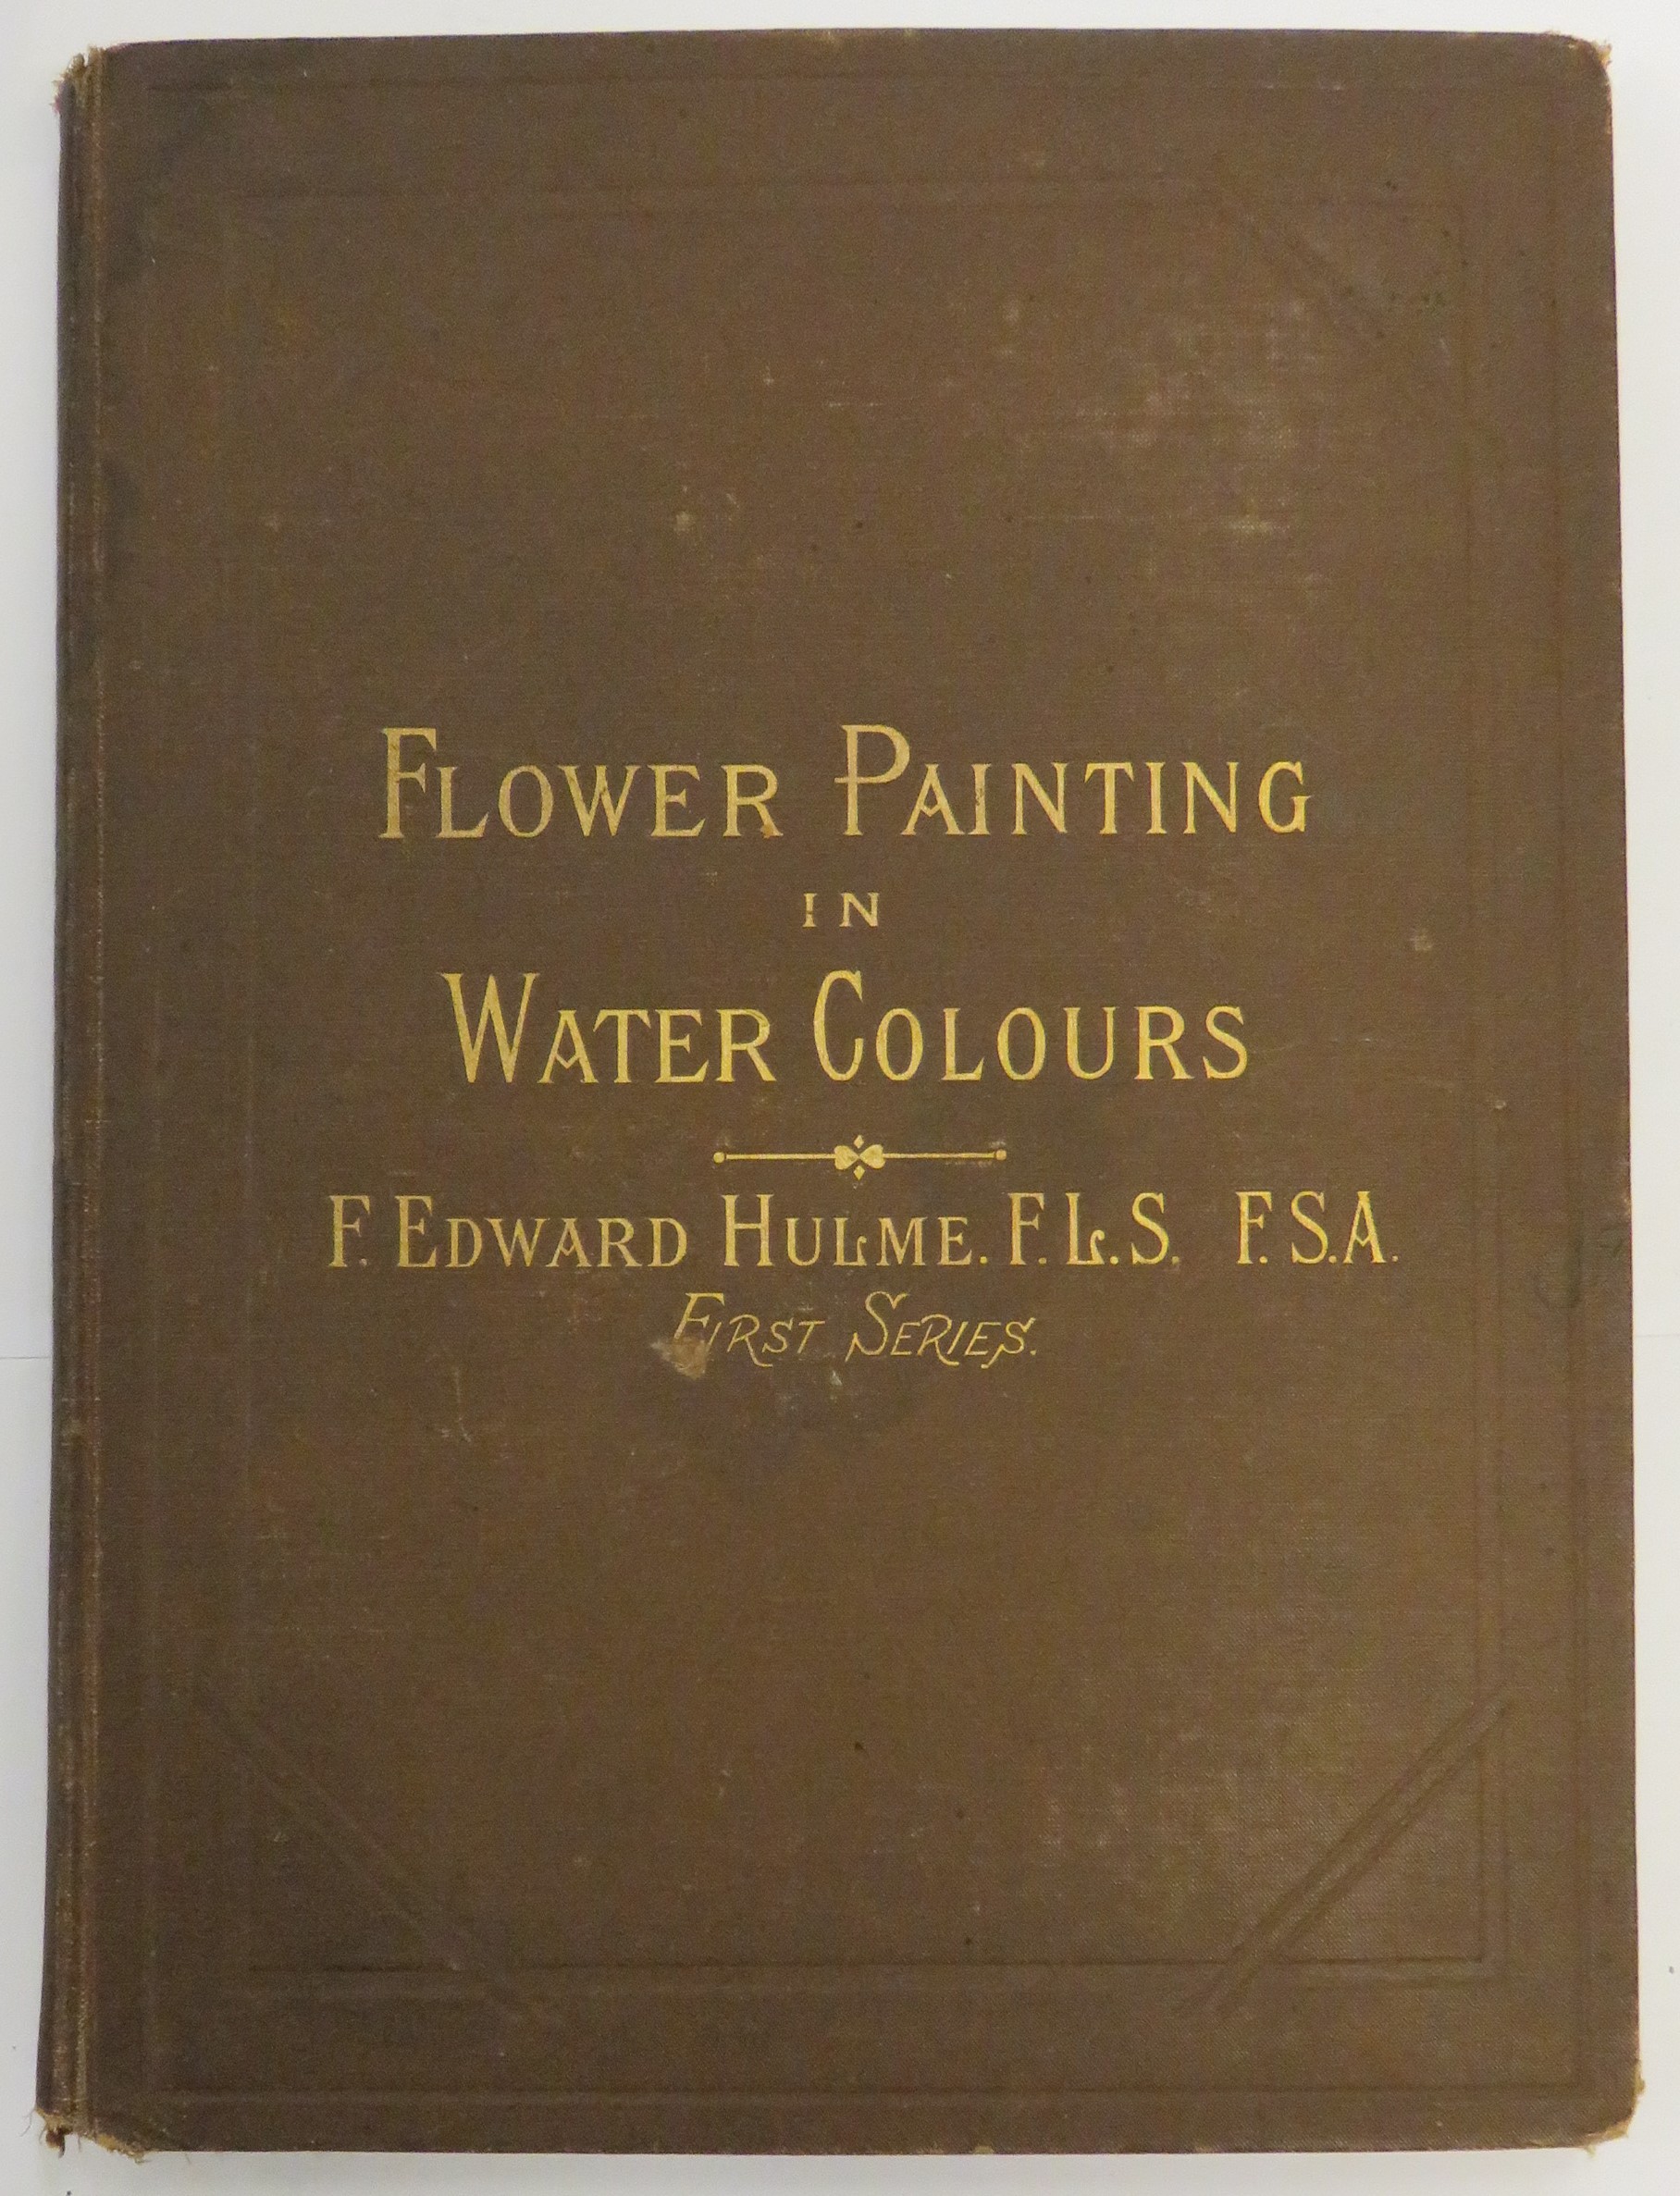 Flower Painting in Water Colours